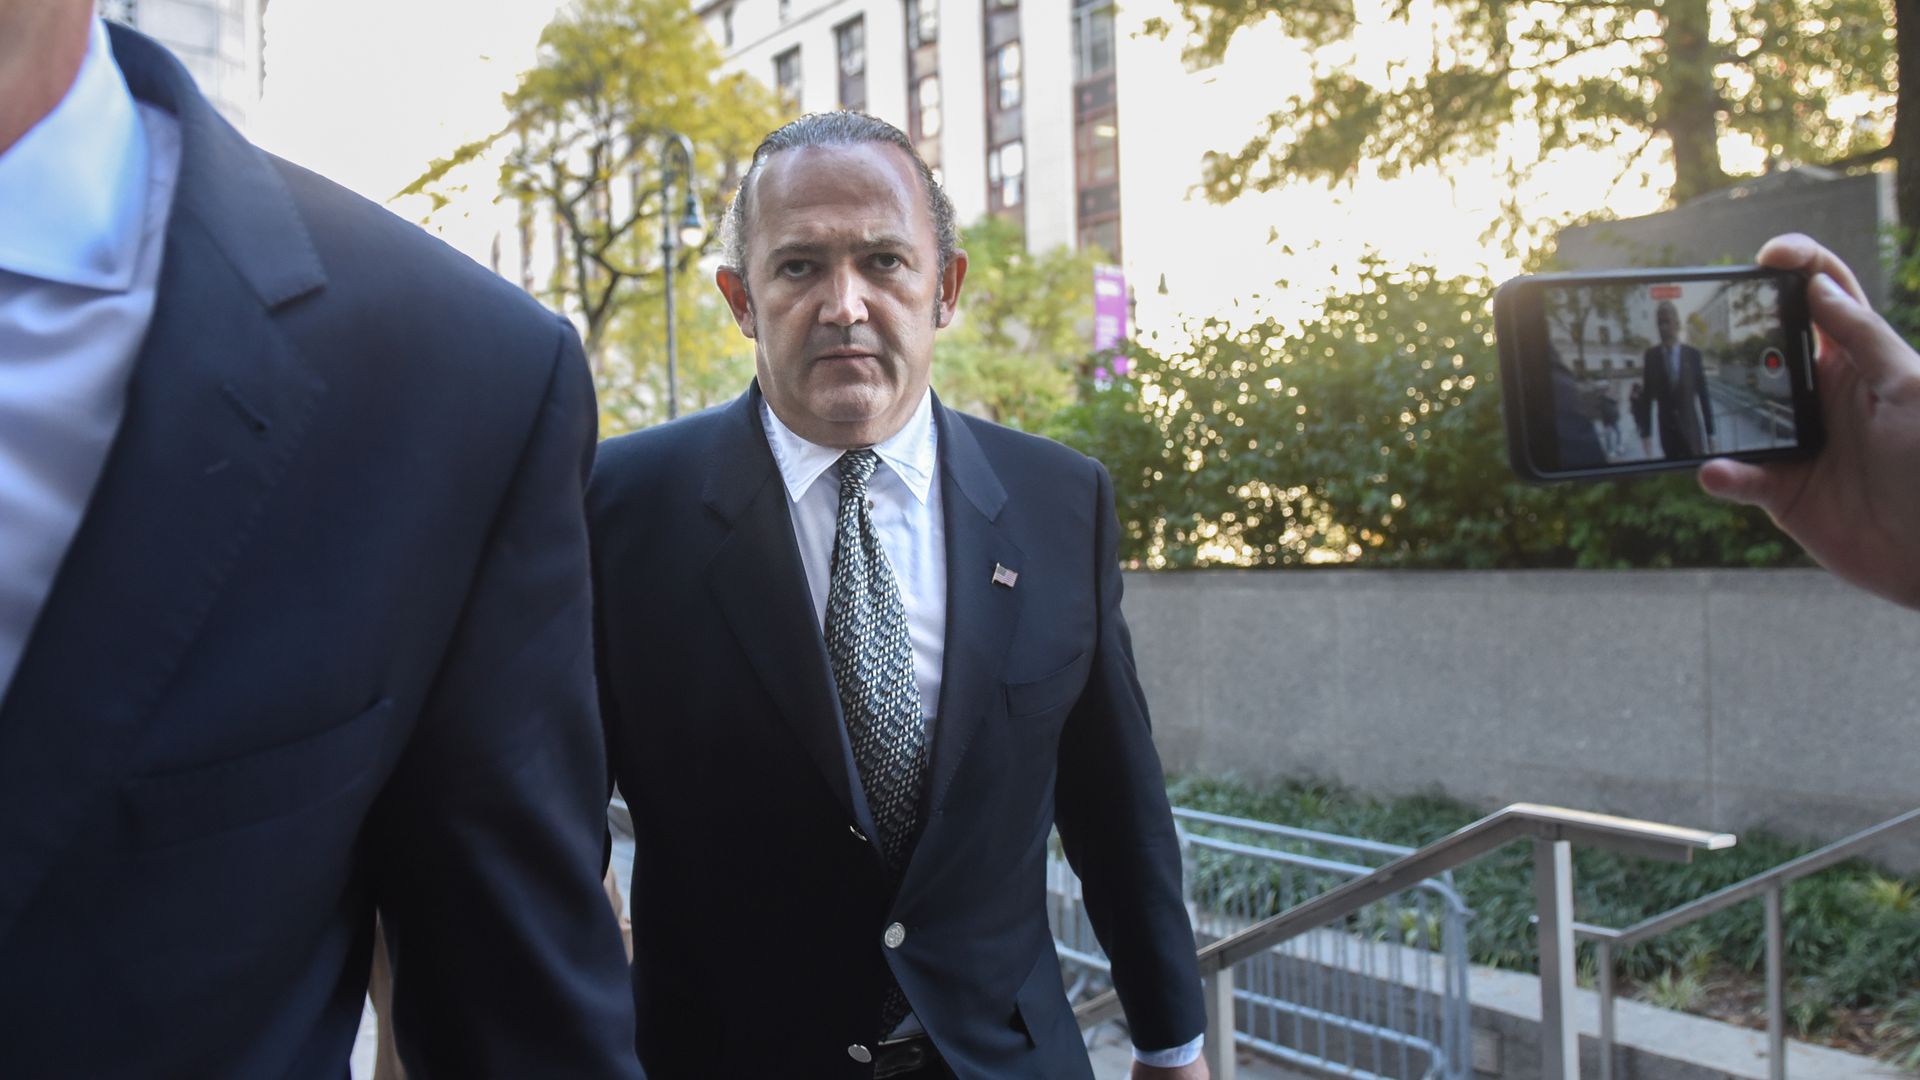 Igor Fruman arrives at federal court for an arraignment hearing on October 23, 2019 in New York City